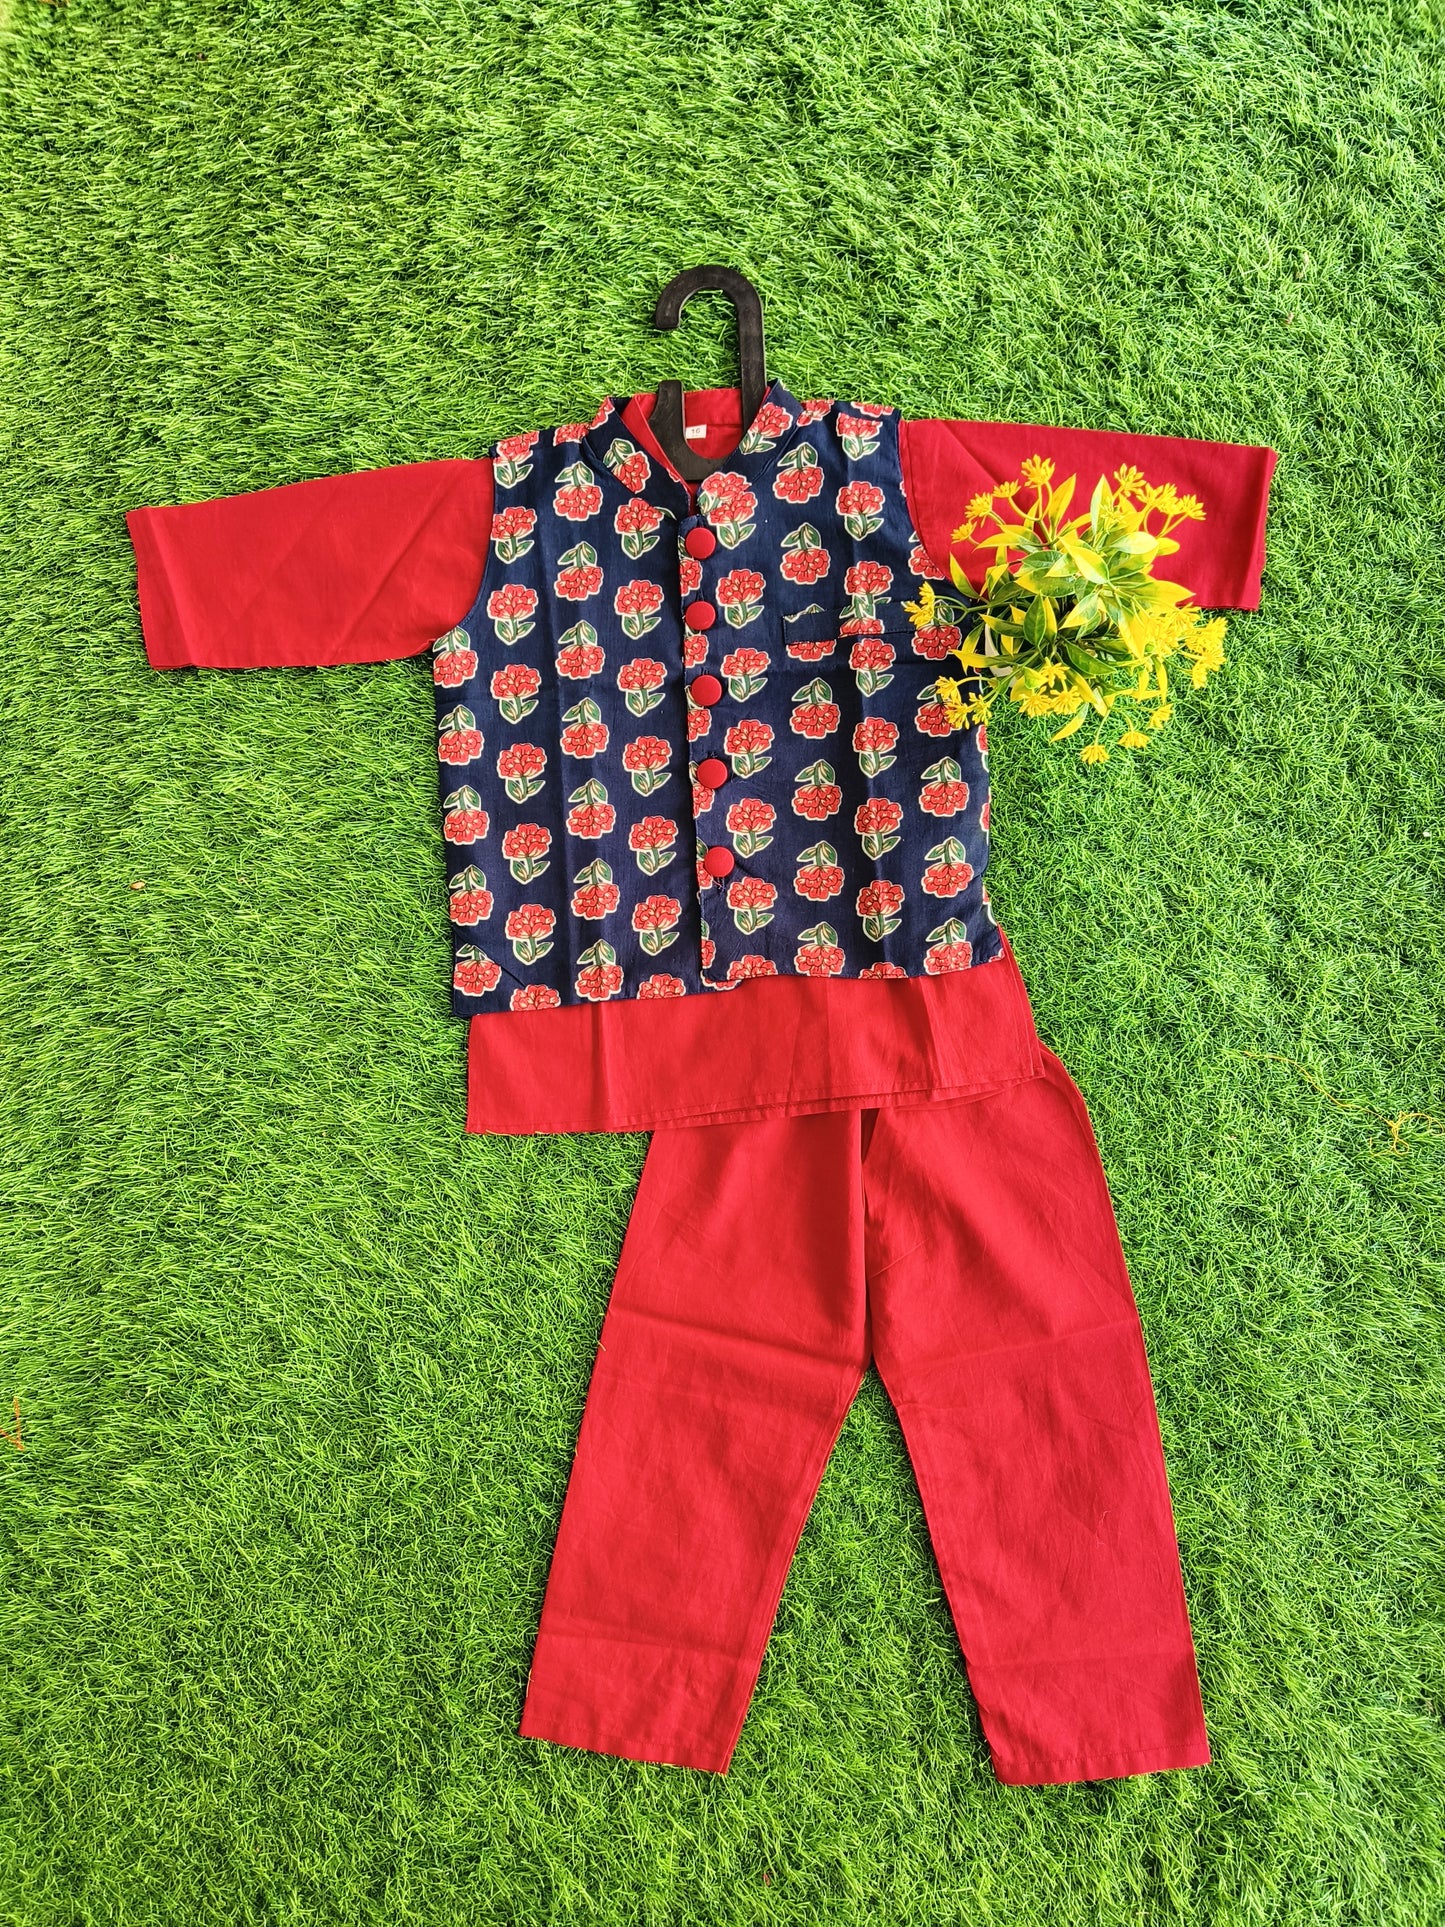 Classic Red Rose Printed Nehru Jacket with Plain Kurta Pant Outfit Set for Boy